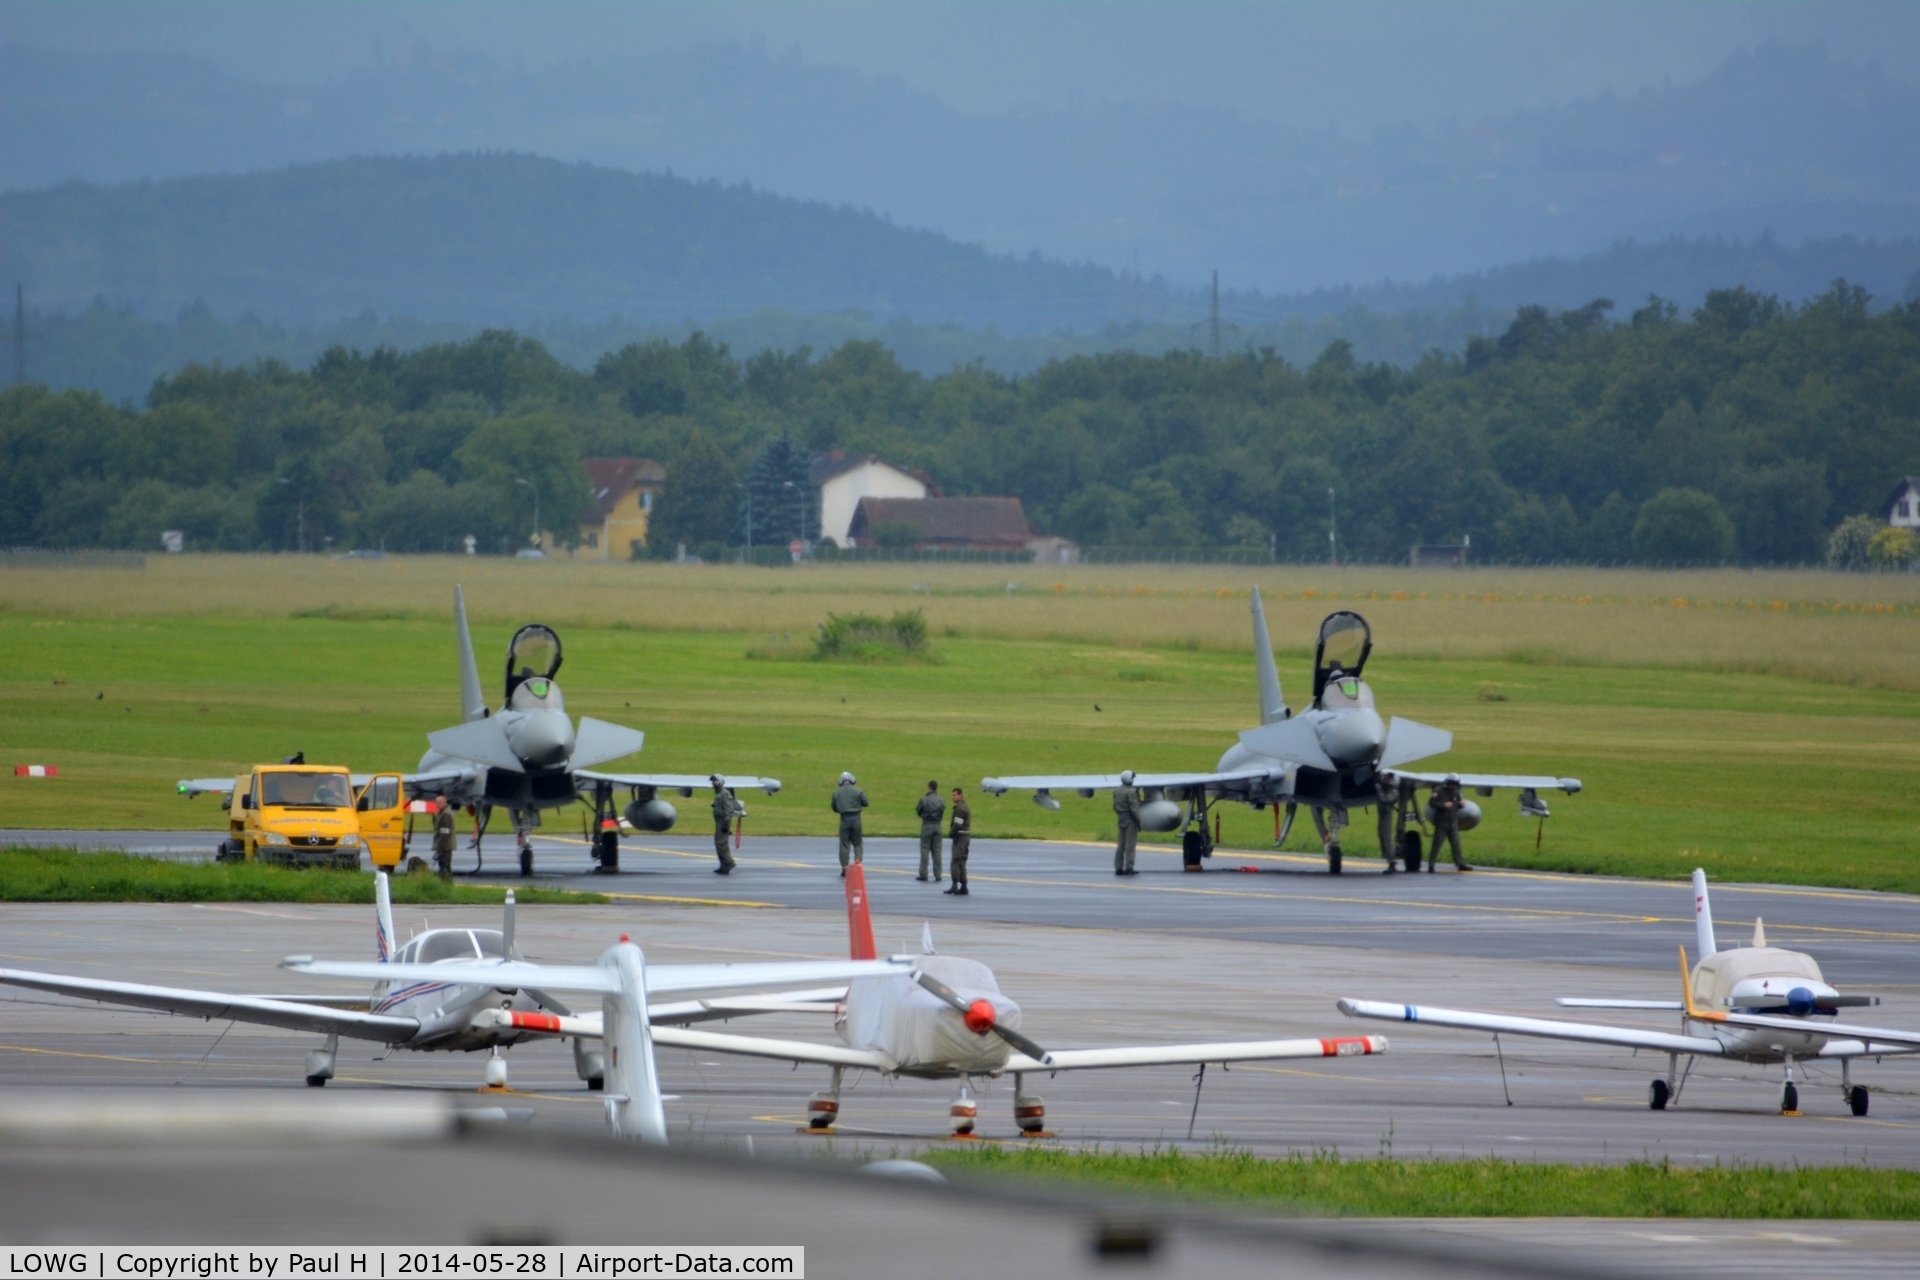 Graz Airport, Graz Austria (LOWG) - 2 Eurofighters of Austrian Air Force at LOWG for a training session